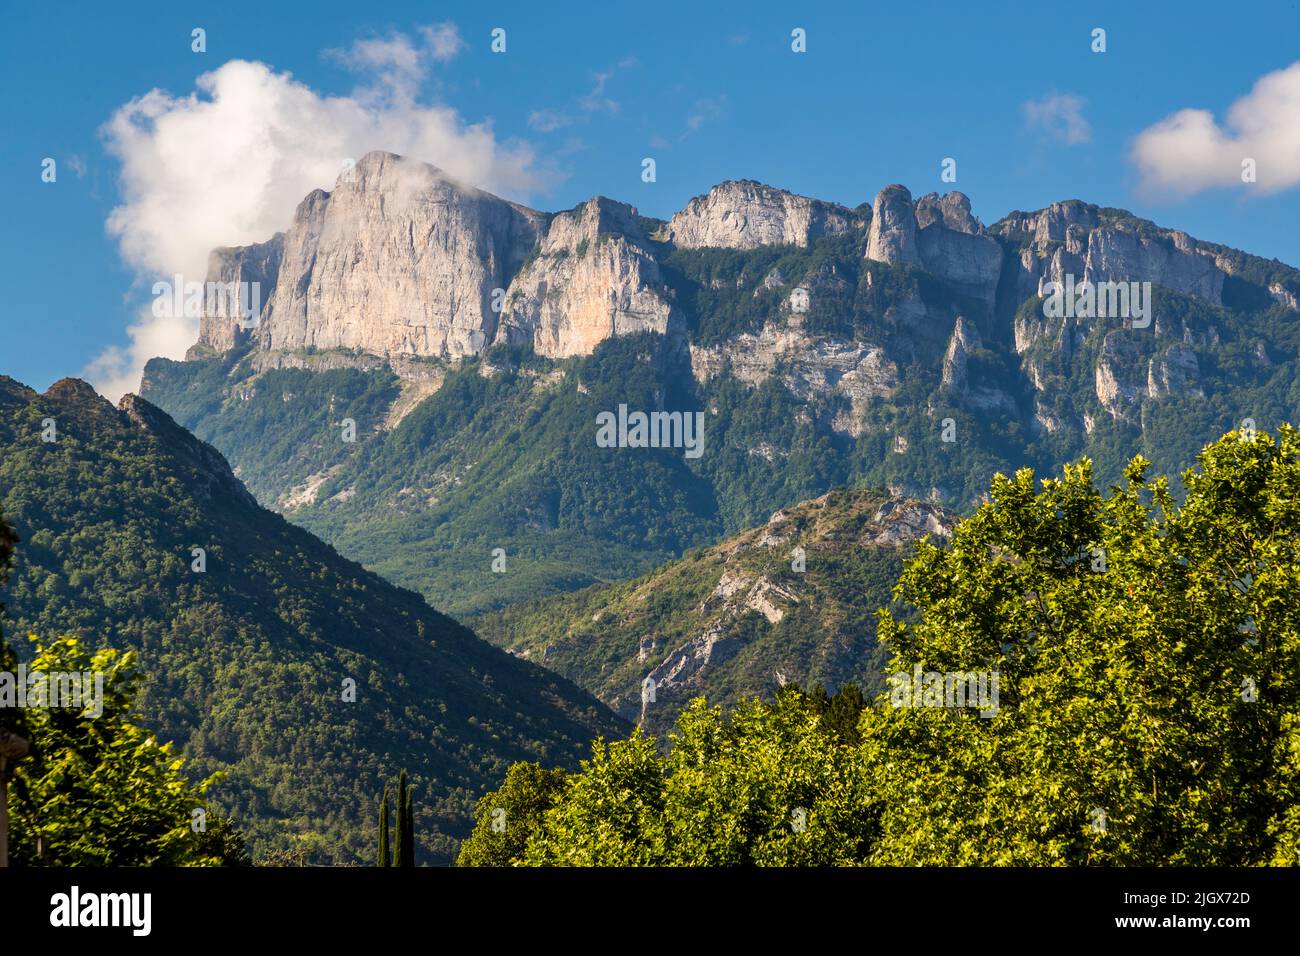 The Trois Becs mountain range is a striking rock formation in the Drôme valley, France Stock Photo